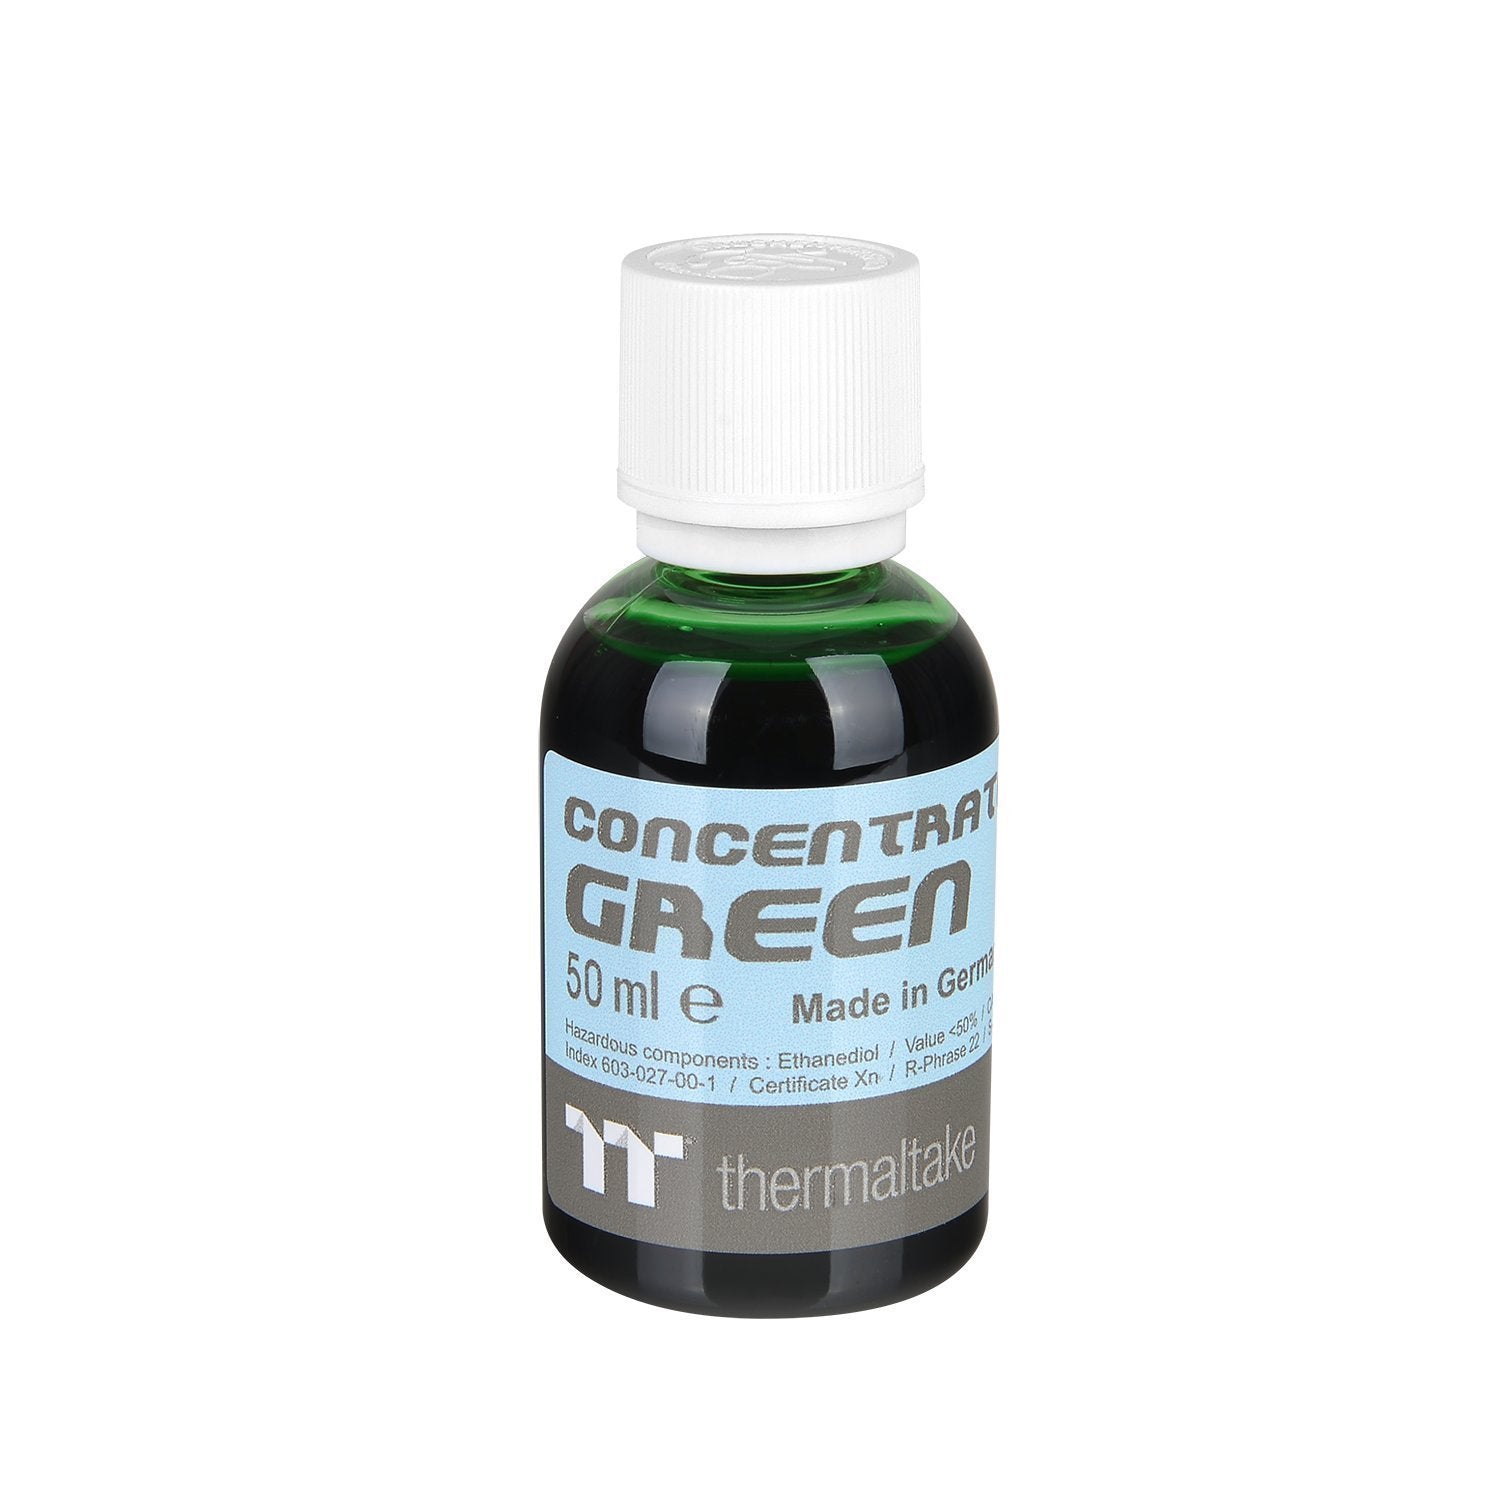 Thermaltake Concentrate Green - Store 974 | ستور ٩٧٤